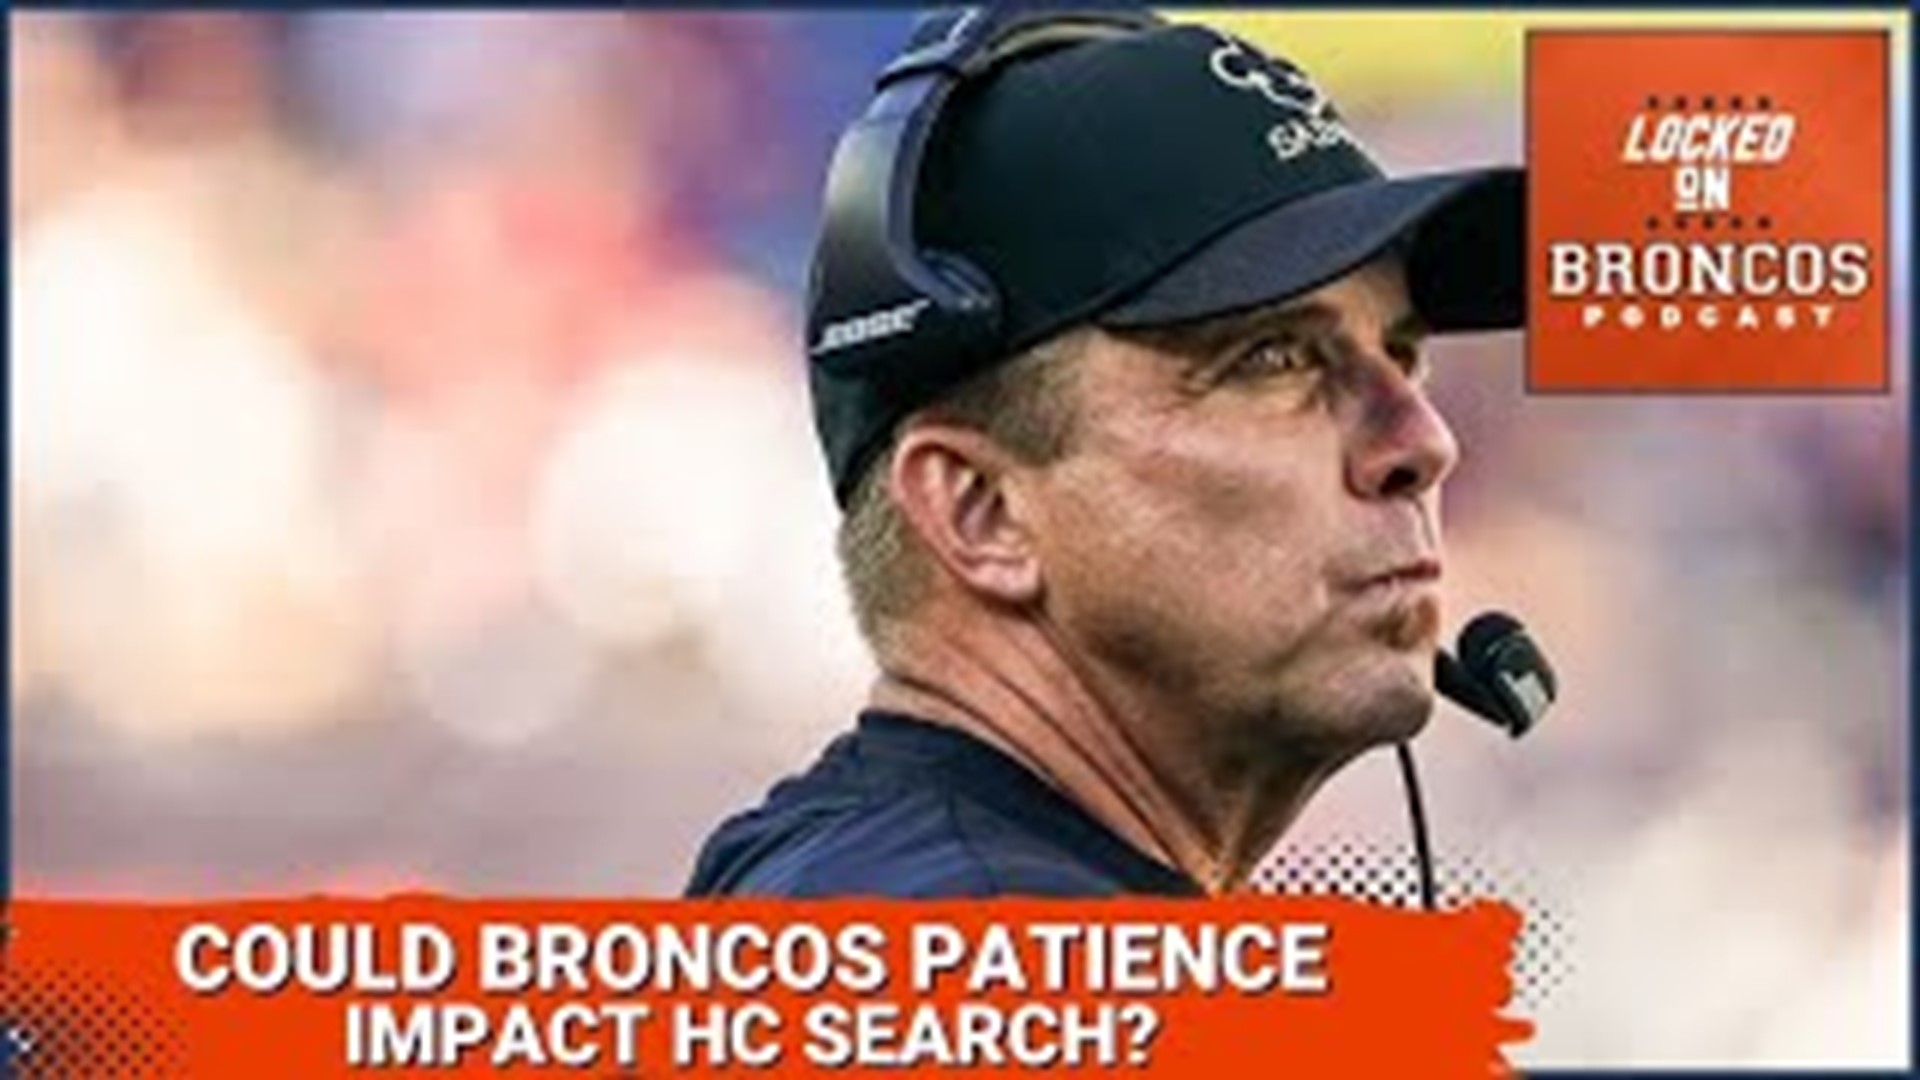 The Broncos head coach search has taken a confusing turn this week with conflicting reports coming out about Payton's interview in Denver.